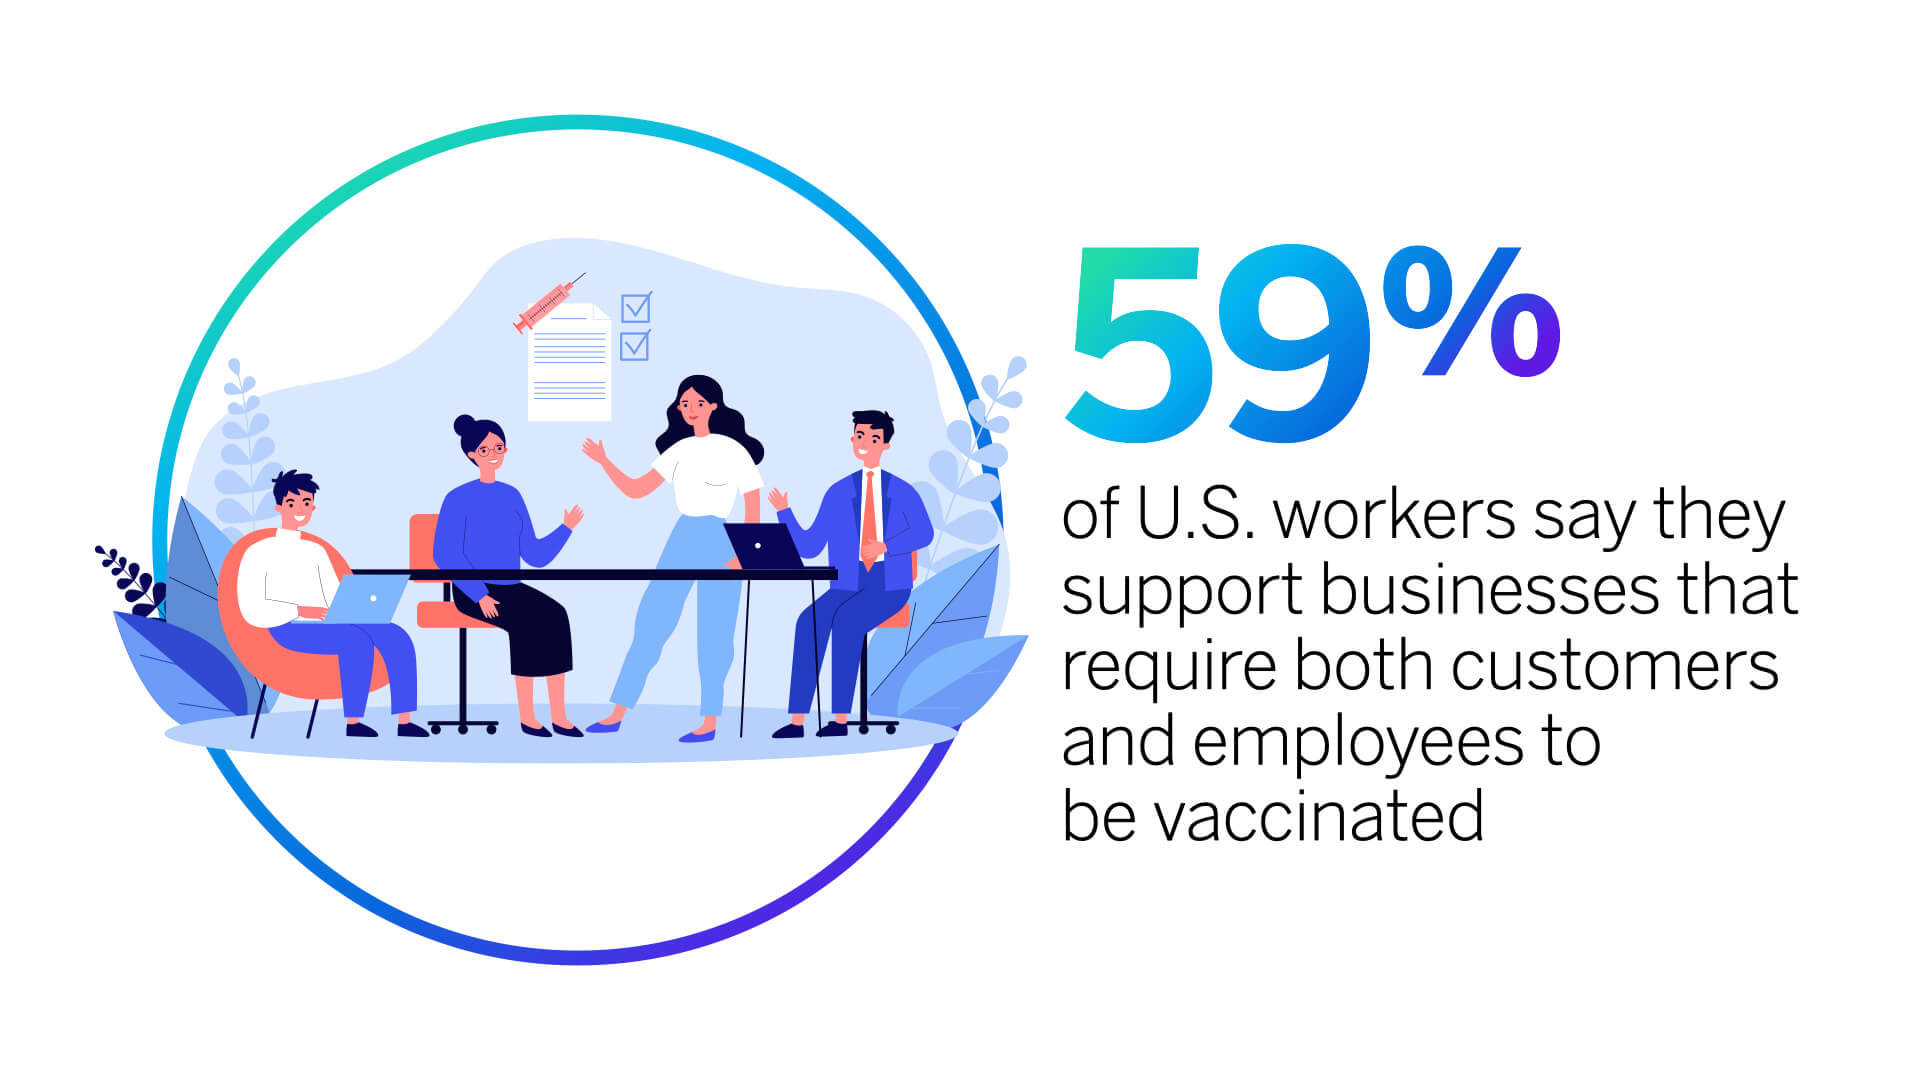 Stat regarding opinions on vaccine mandates for customers and employees